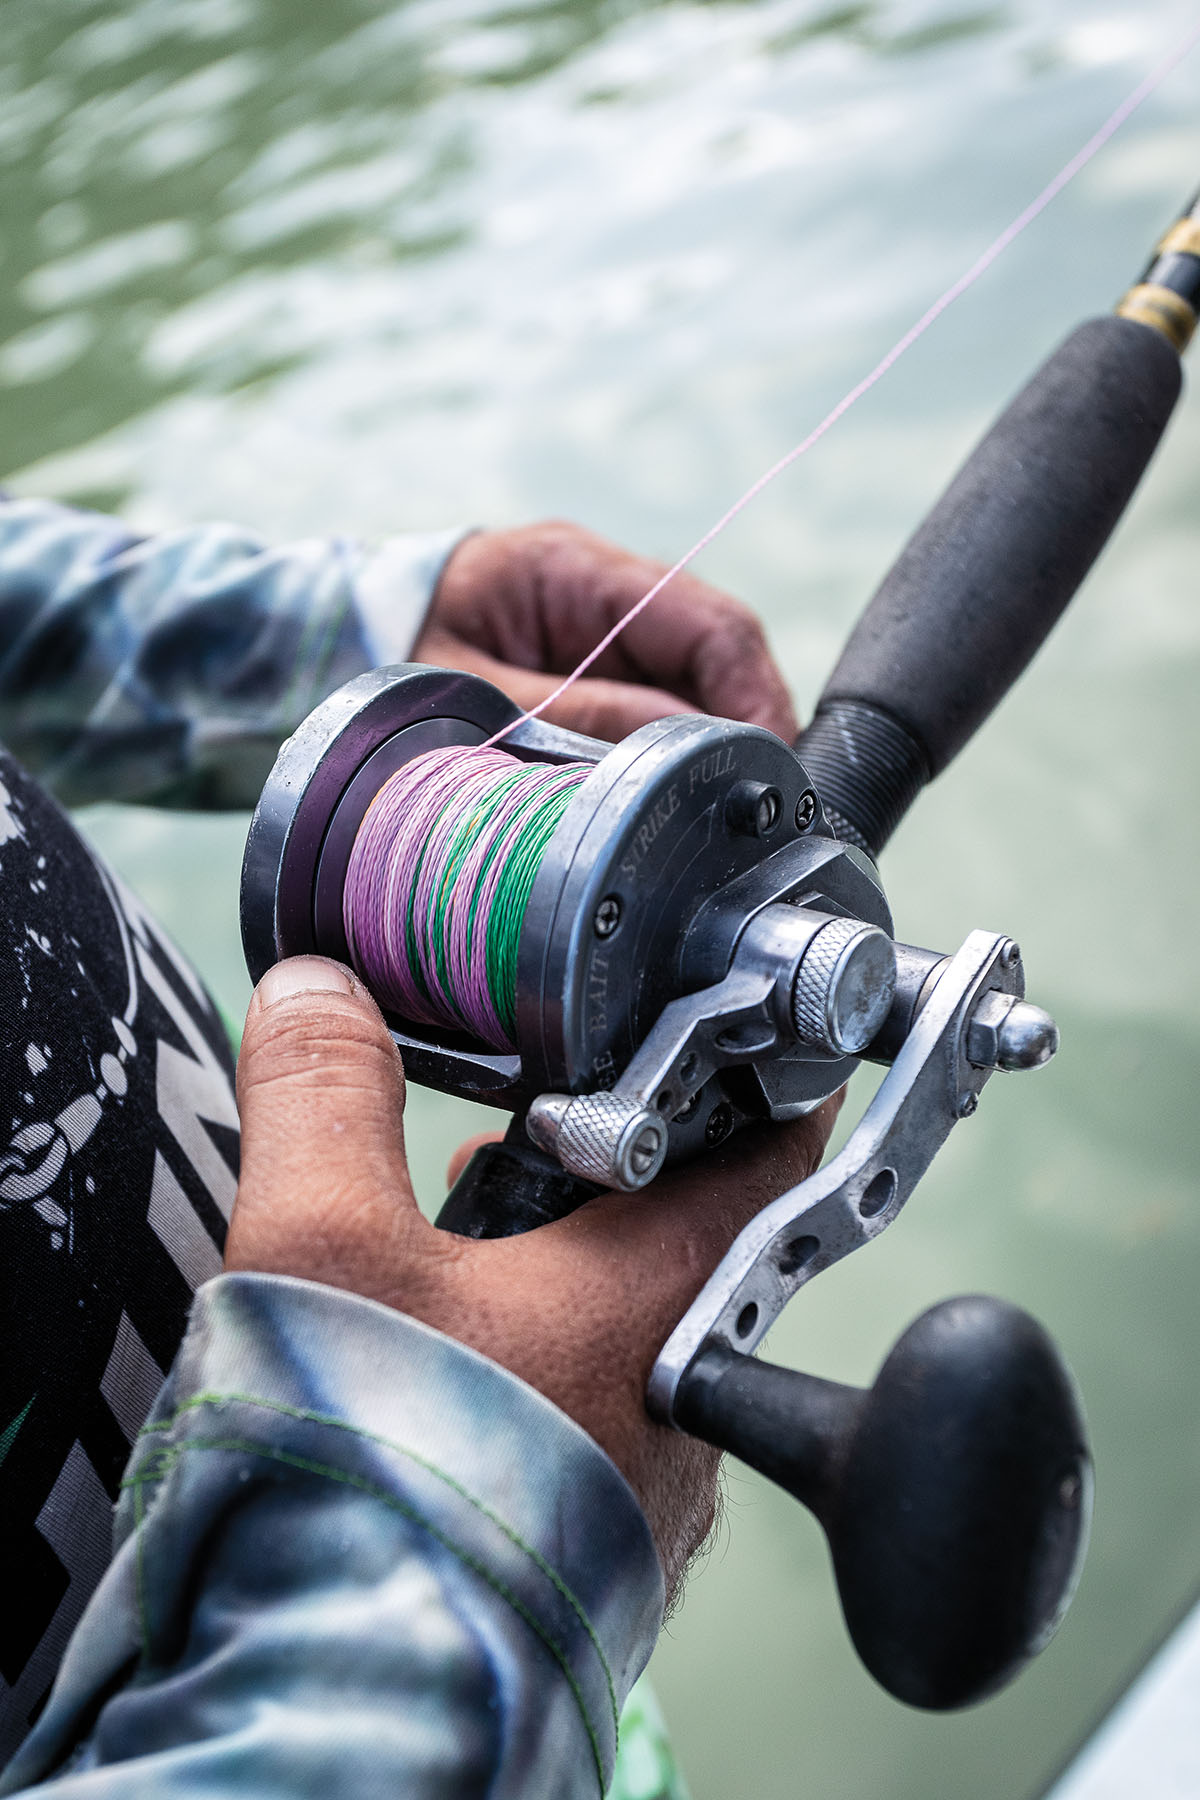 A person's hands hold a fishing reel with bring pink line above the water